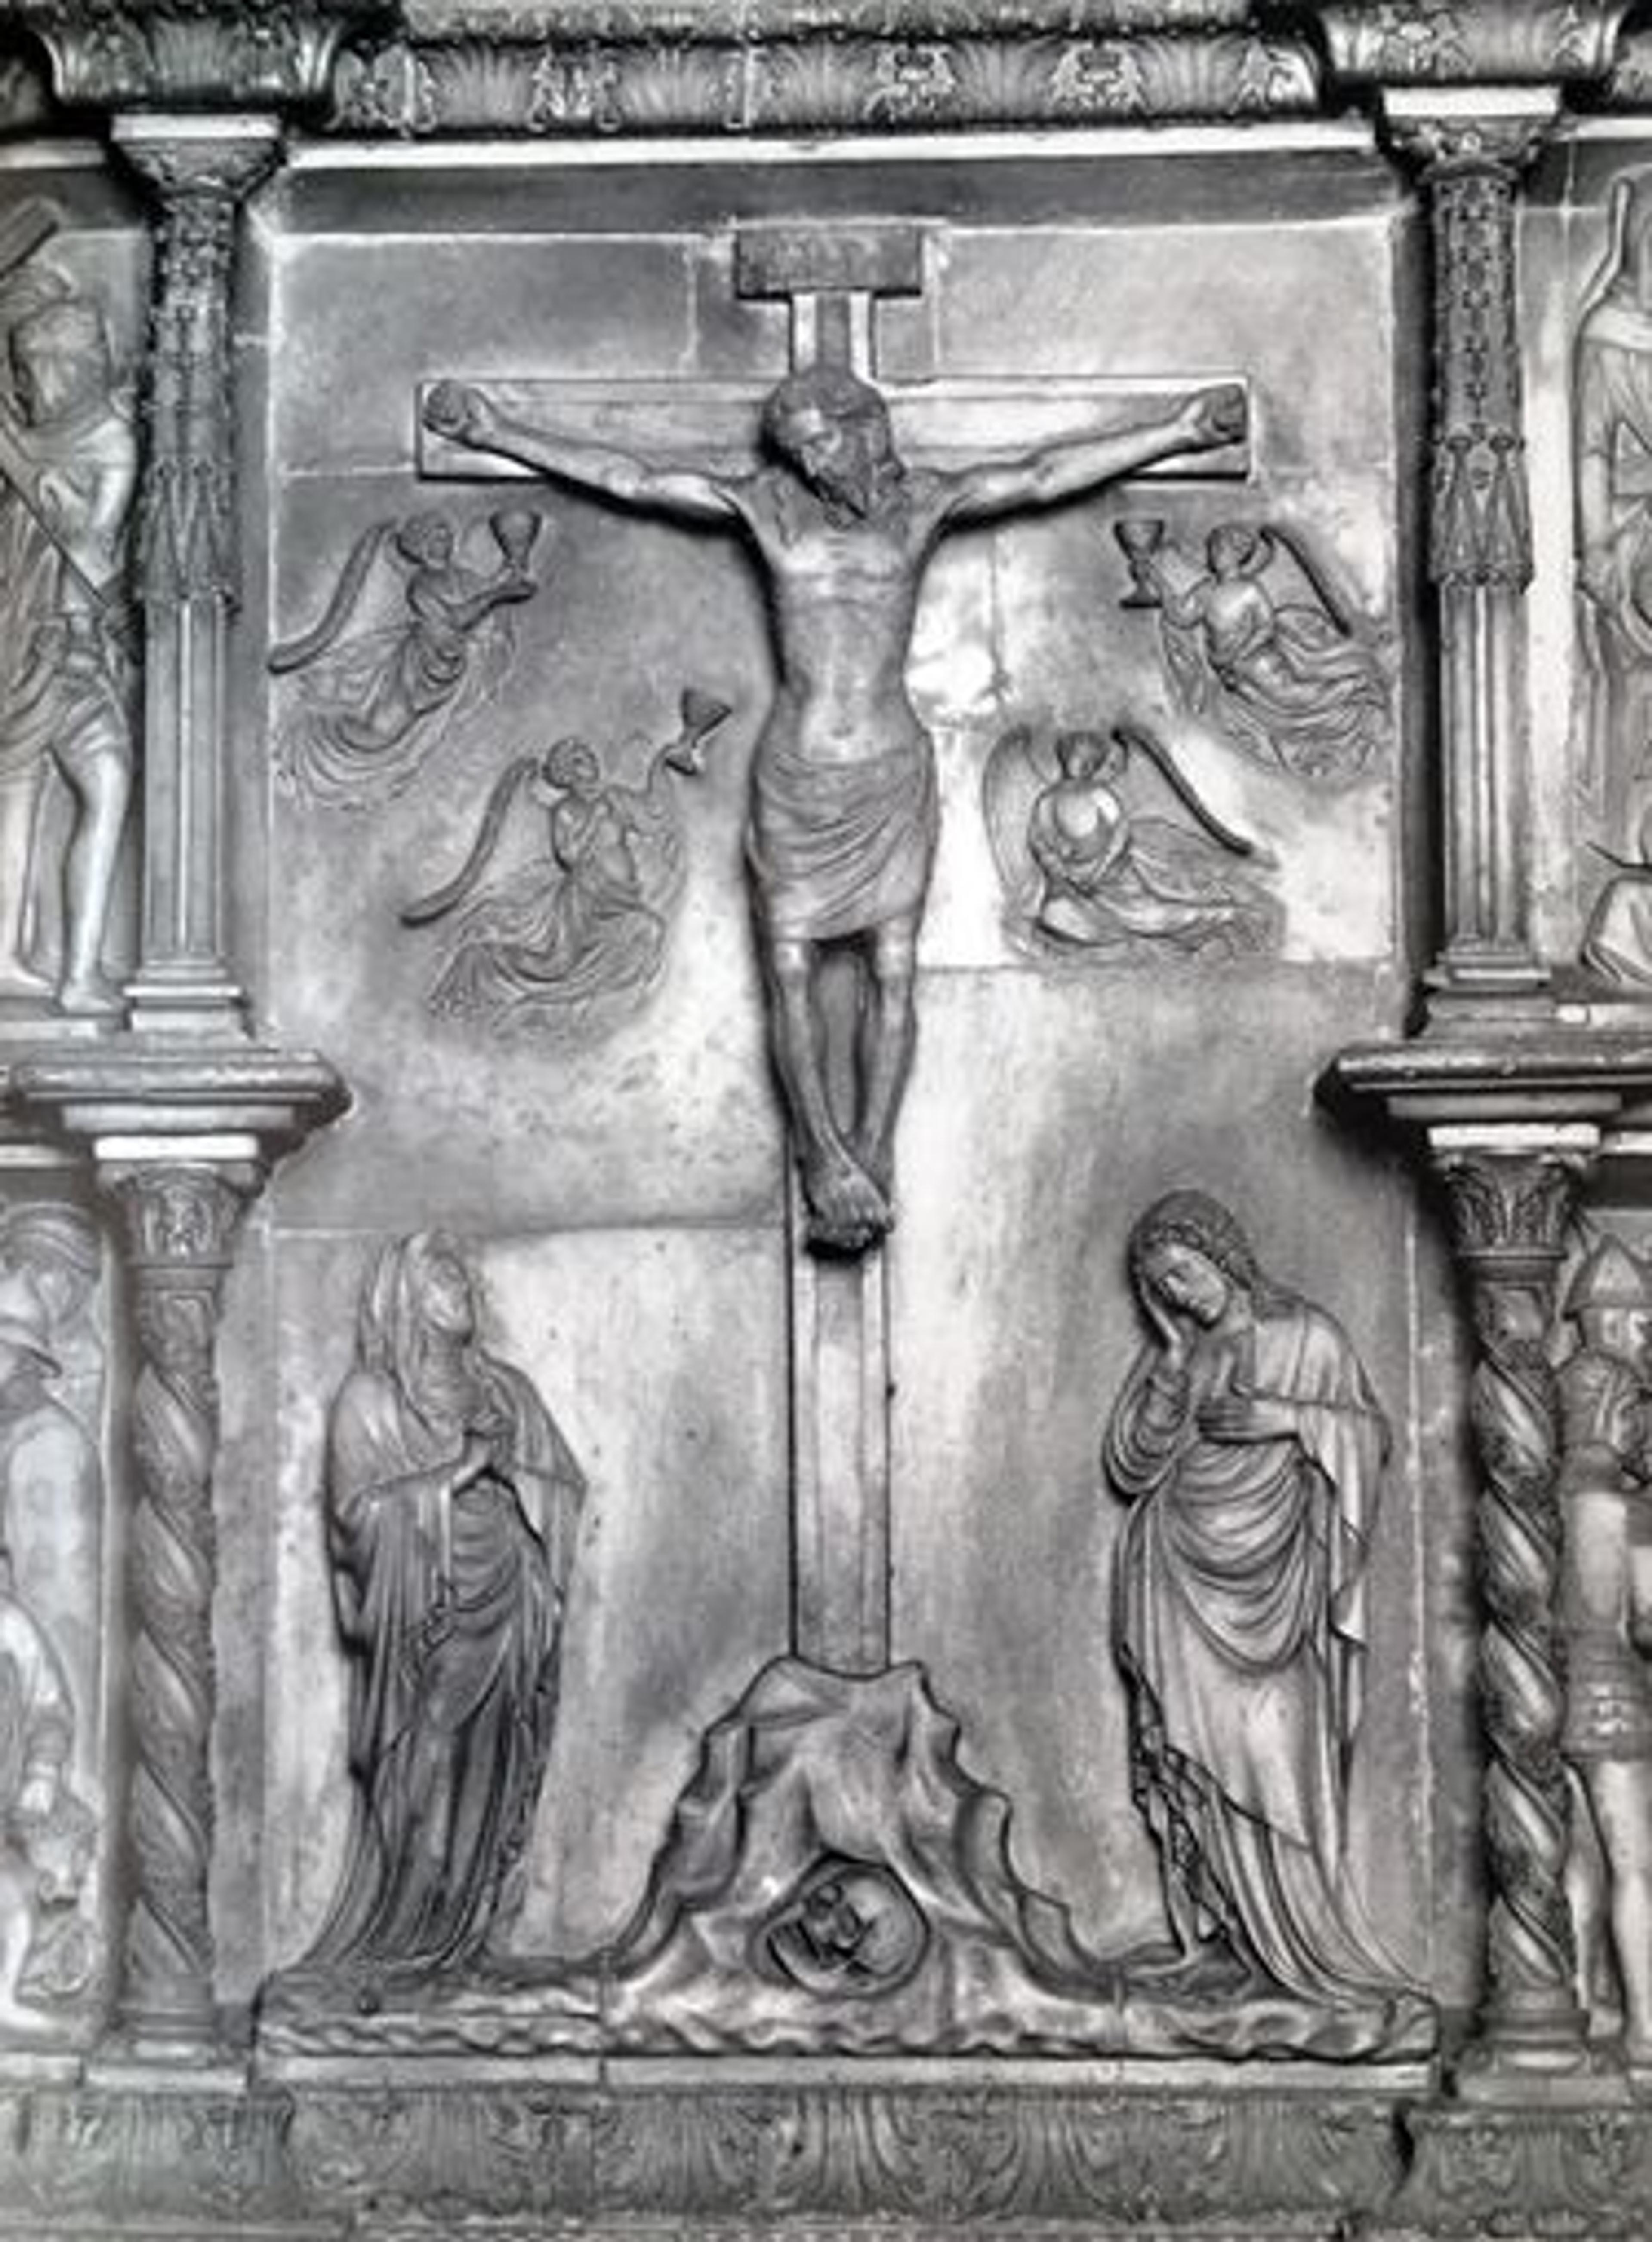 Photo of a Crucifixion scene from the "Ancona of the Passion" in the Basilica of Sant'Eustorgio in Milan 